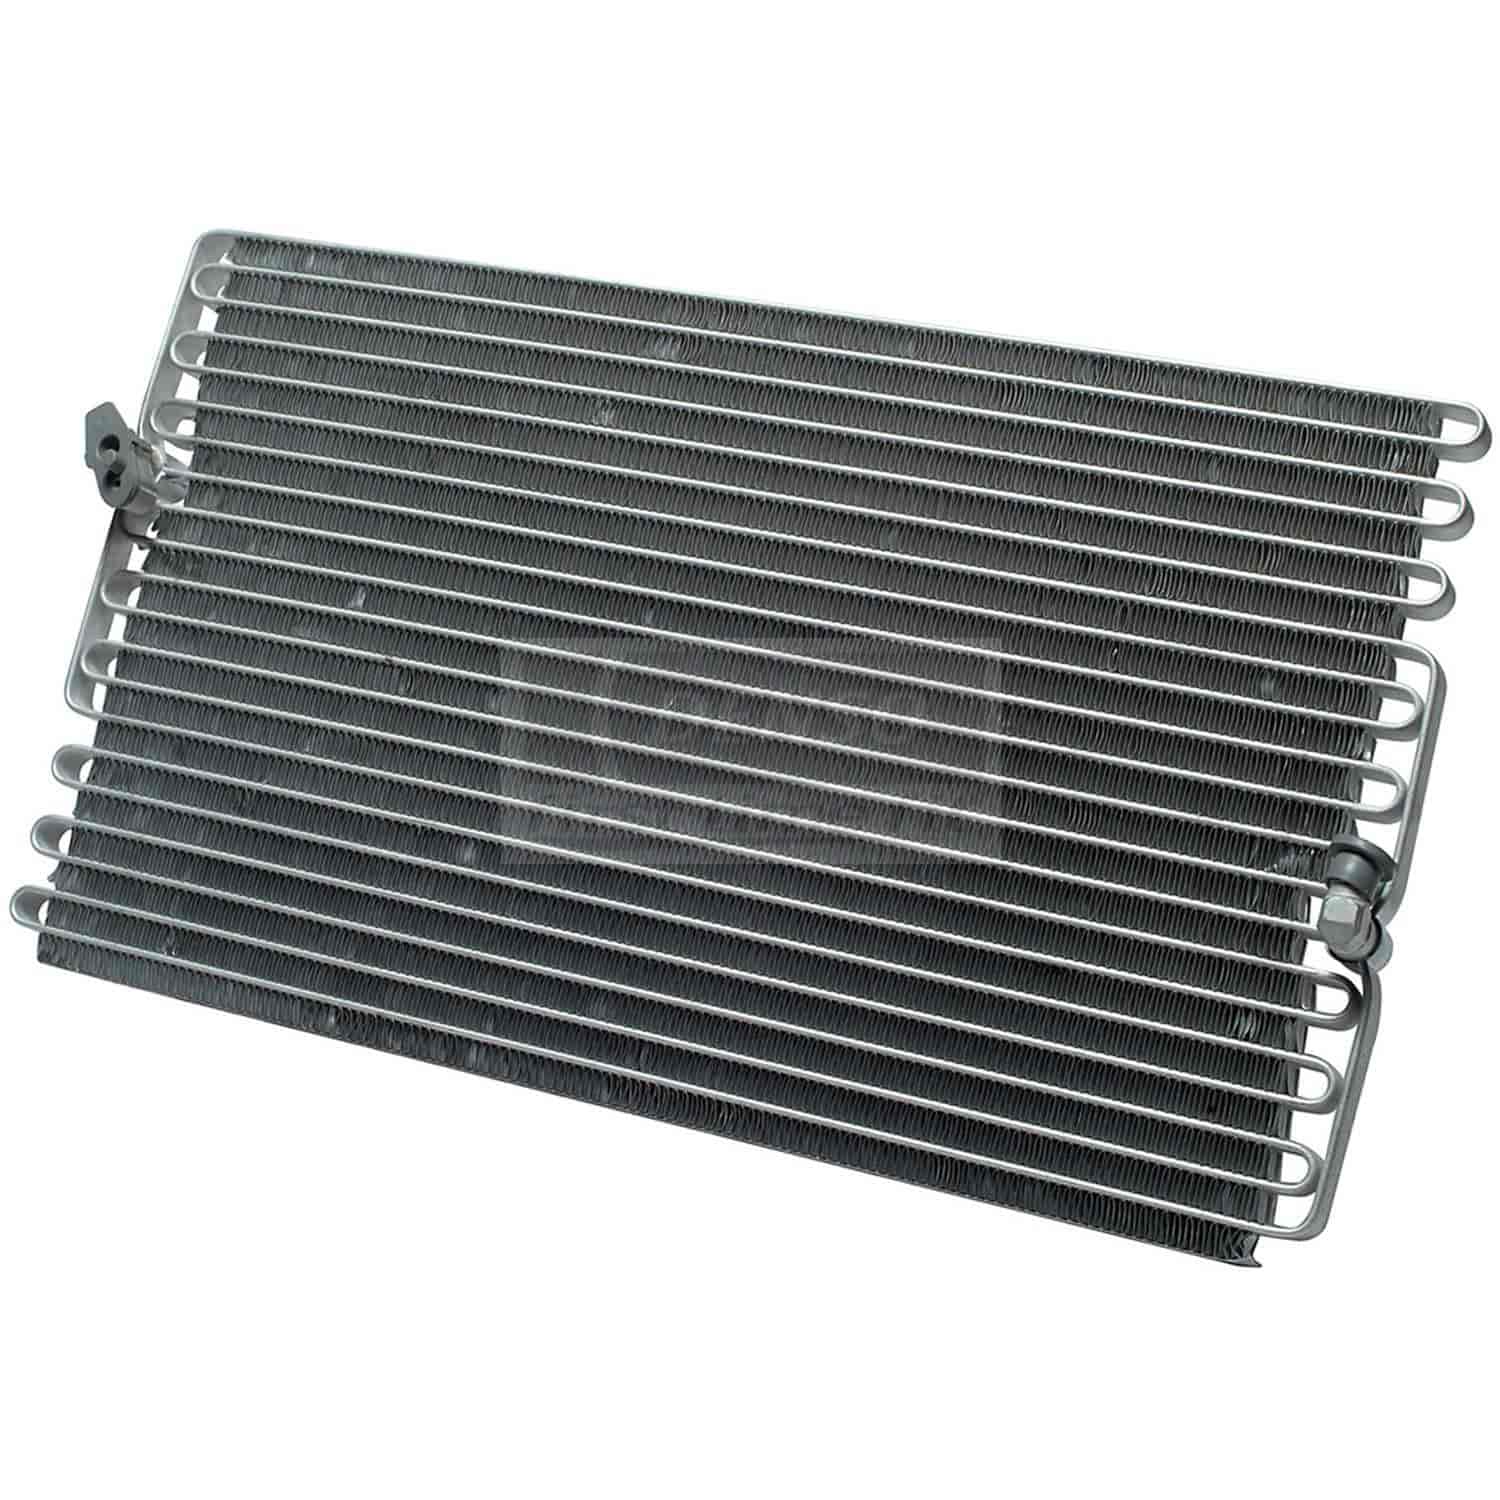 OE Replacement A/C Condenser 2001-04 Toyota Tacoma